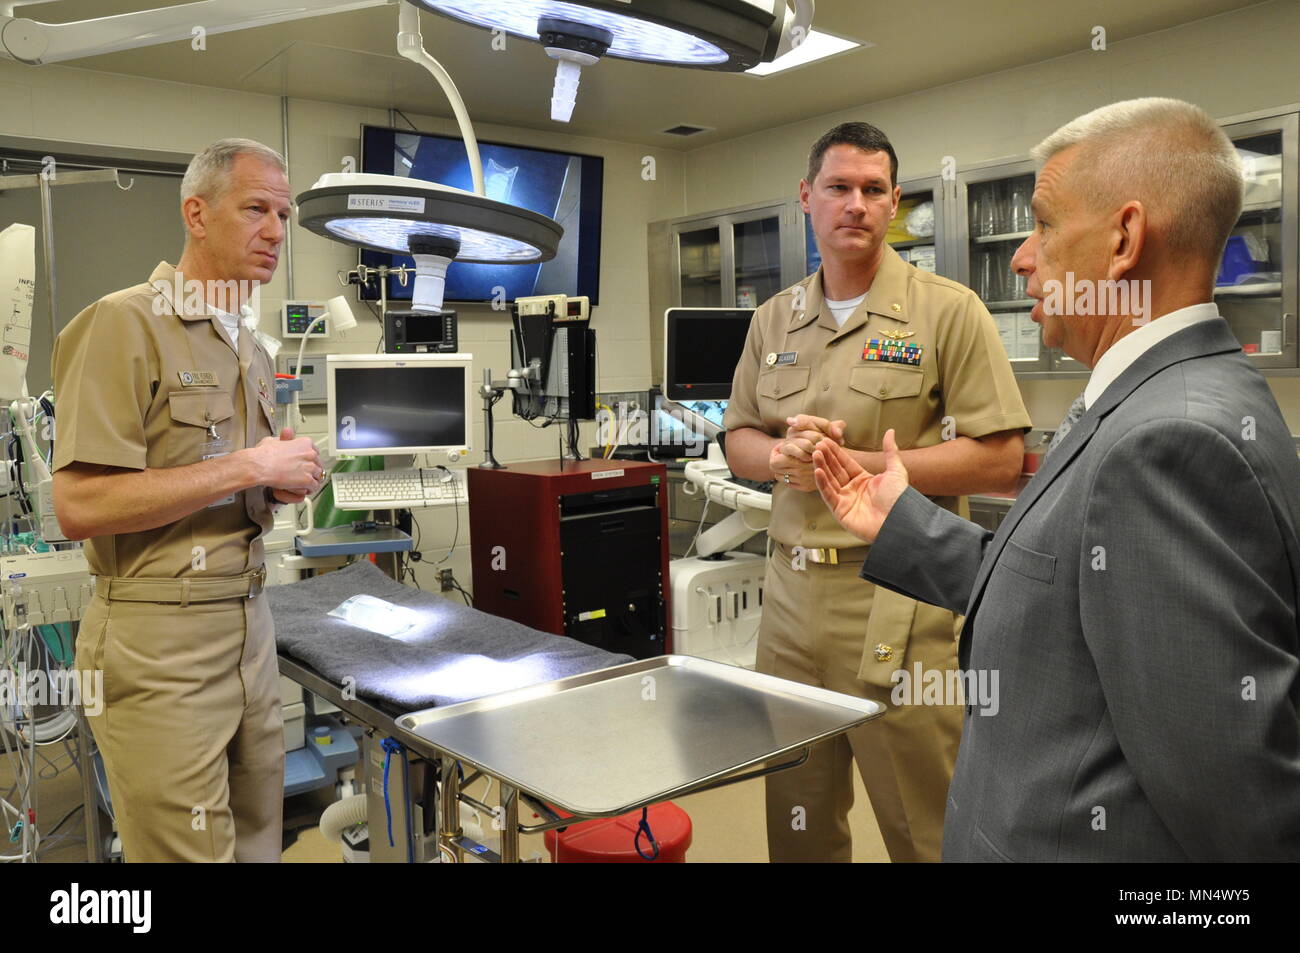 Rear Adm. Paul D. Pearigen, Commander, Navy Medicine West and Chief of the Medical Service Corps (left) and Naval Medical Research Unit – San Antonio (NAMRU-SA) Science Director, Sylvain Cardin, Ph.D. discuss the unique poly-trauma injury model system developed and validated by Cmdr. Jacob J. Glaser (center) and his team at NAMRU-SA during a recent visit. NAMRU-SA researchers are at the forefront in testing combinations of FDA-approved therapeutics to stabilize patients, pre-hospital and during transport. (Photo courtesy of NAMRU-SA Public Affairs) Stock Photo